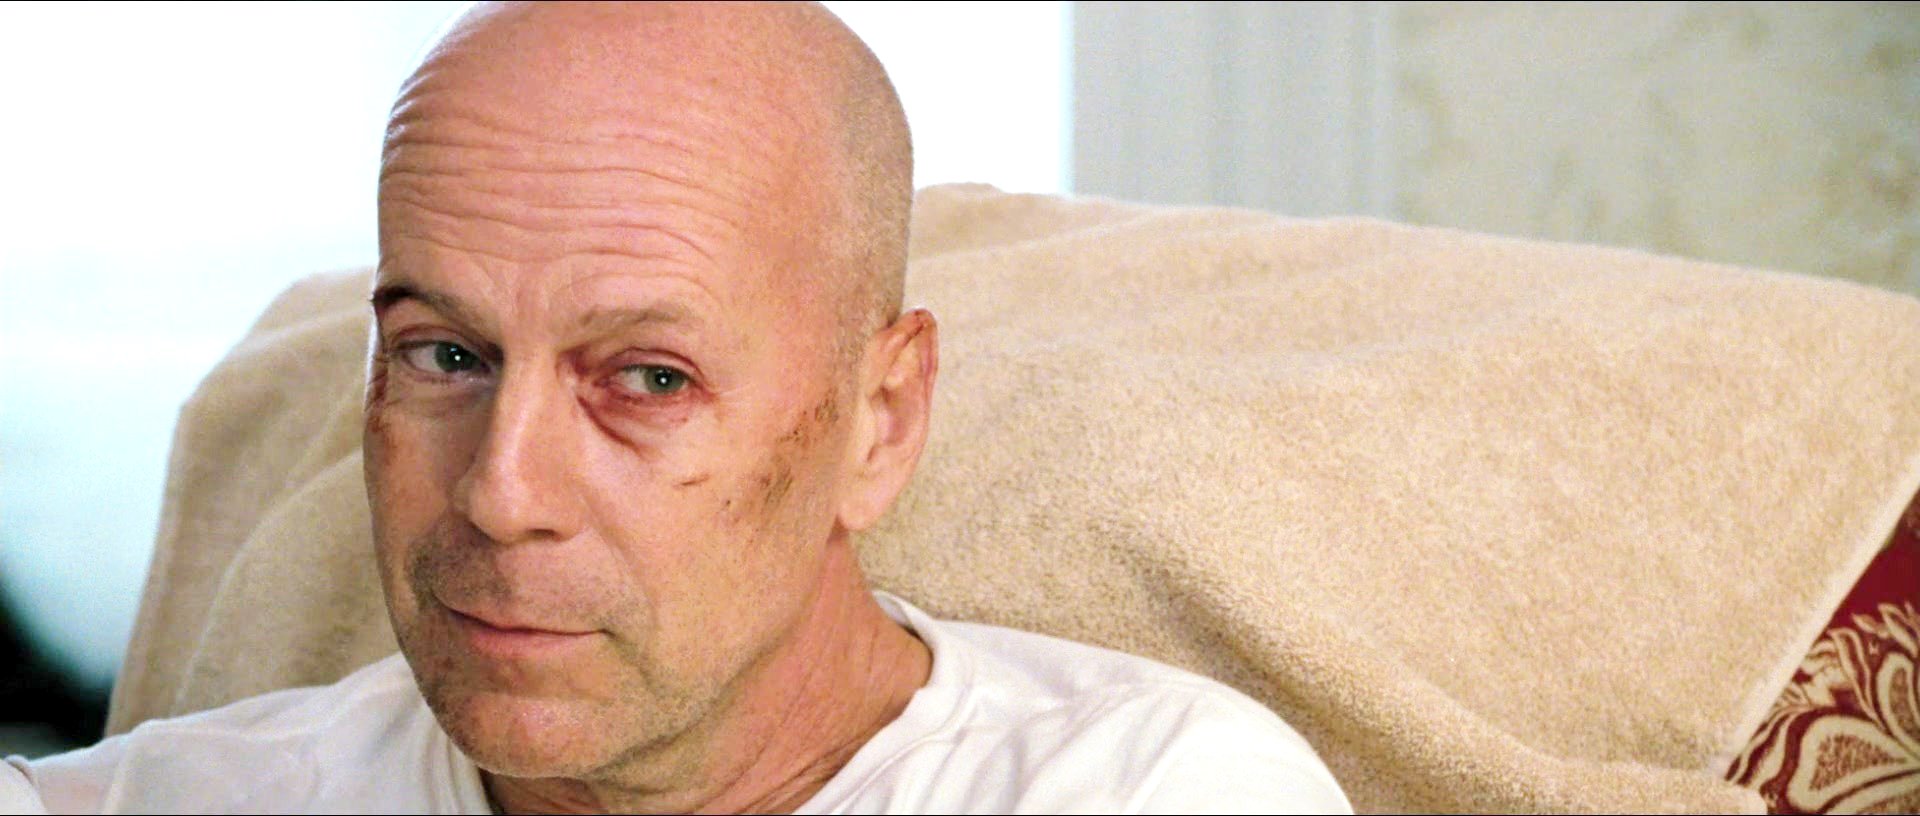 Bruce Willis stars as Frank Moses in Summit Entertainment's Red (2010)